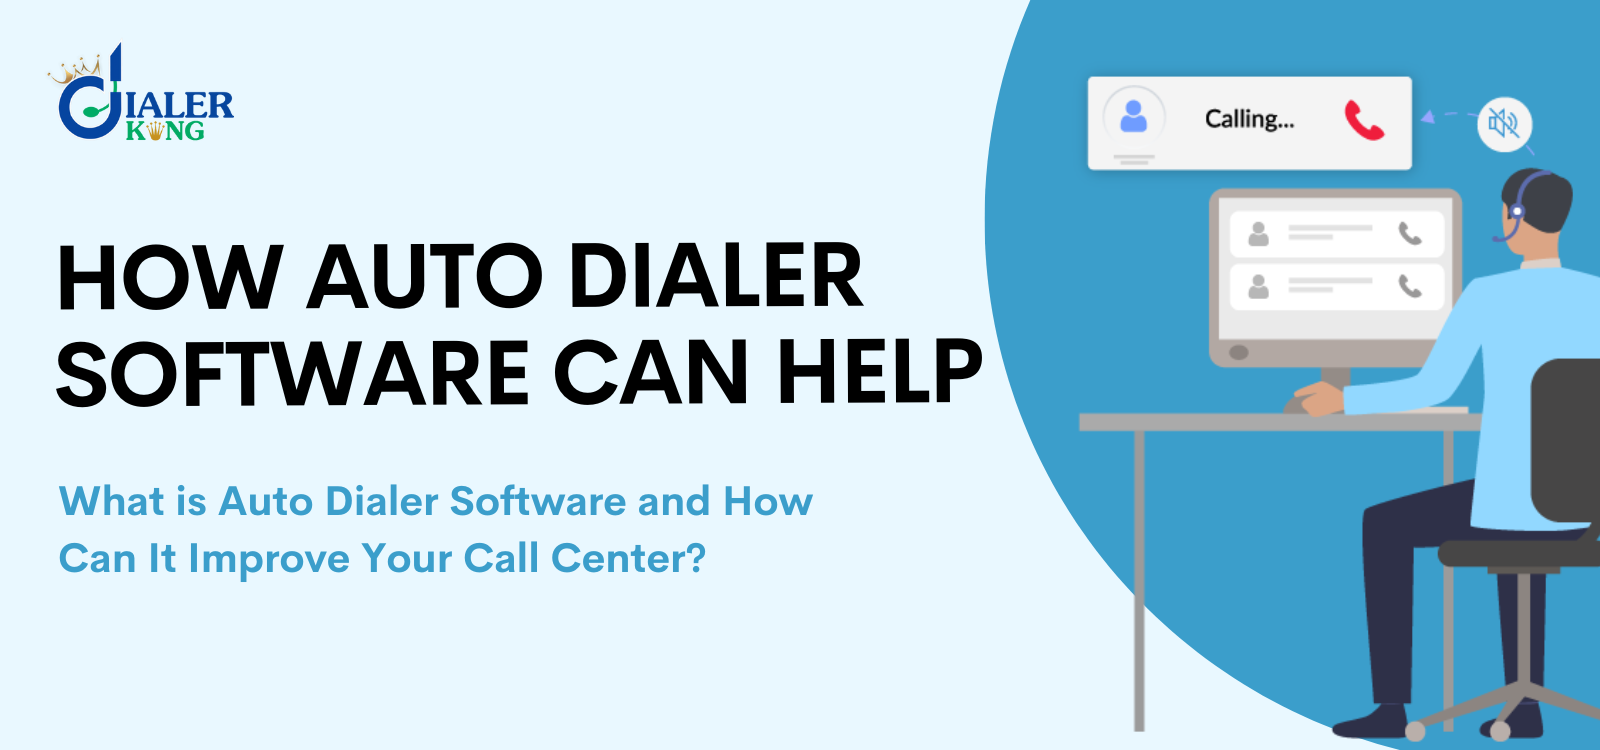 What is Auto Dialer Software and How Can It Improve Your Call Center